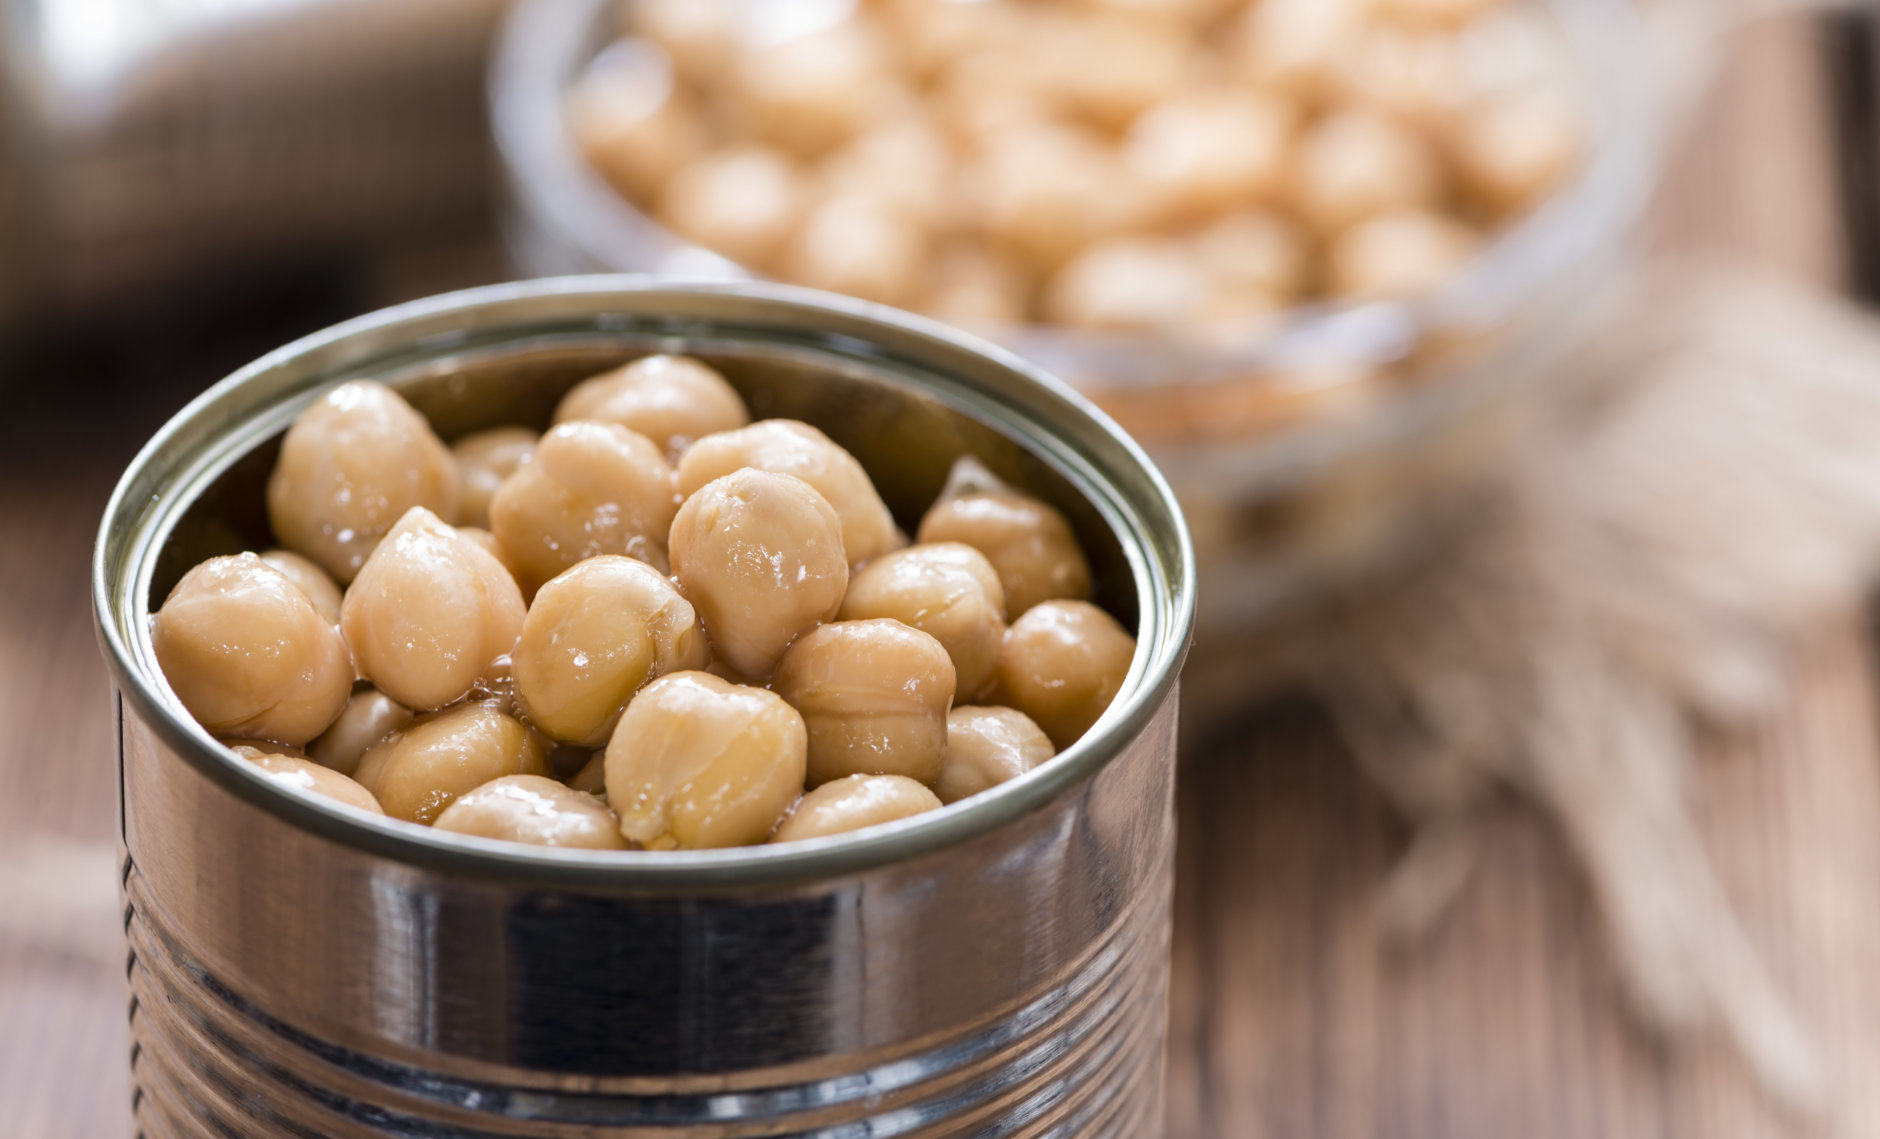 Portion of preserved Chick Peas (close-up shot)